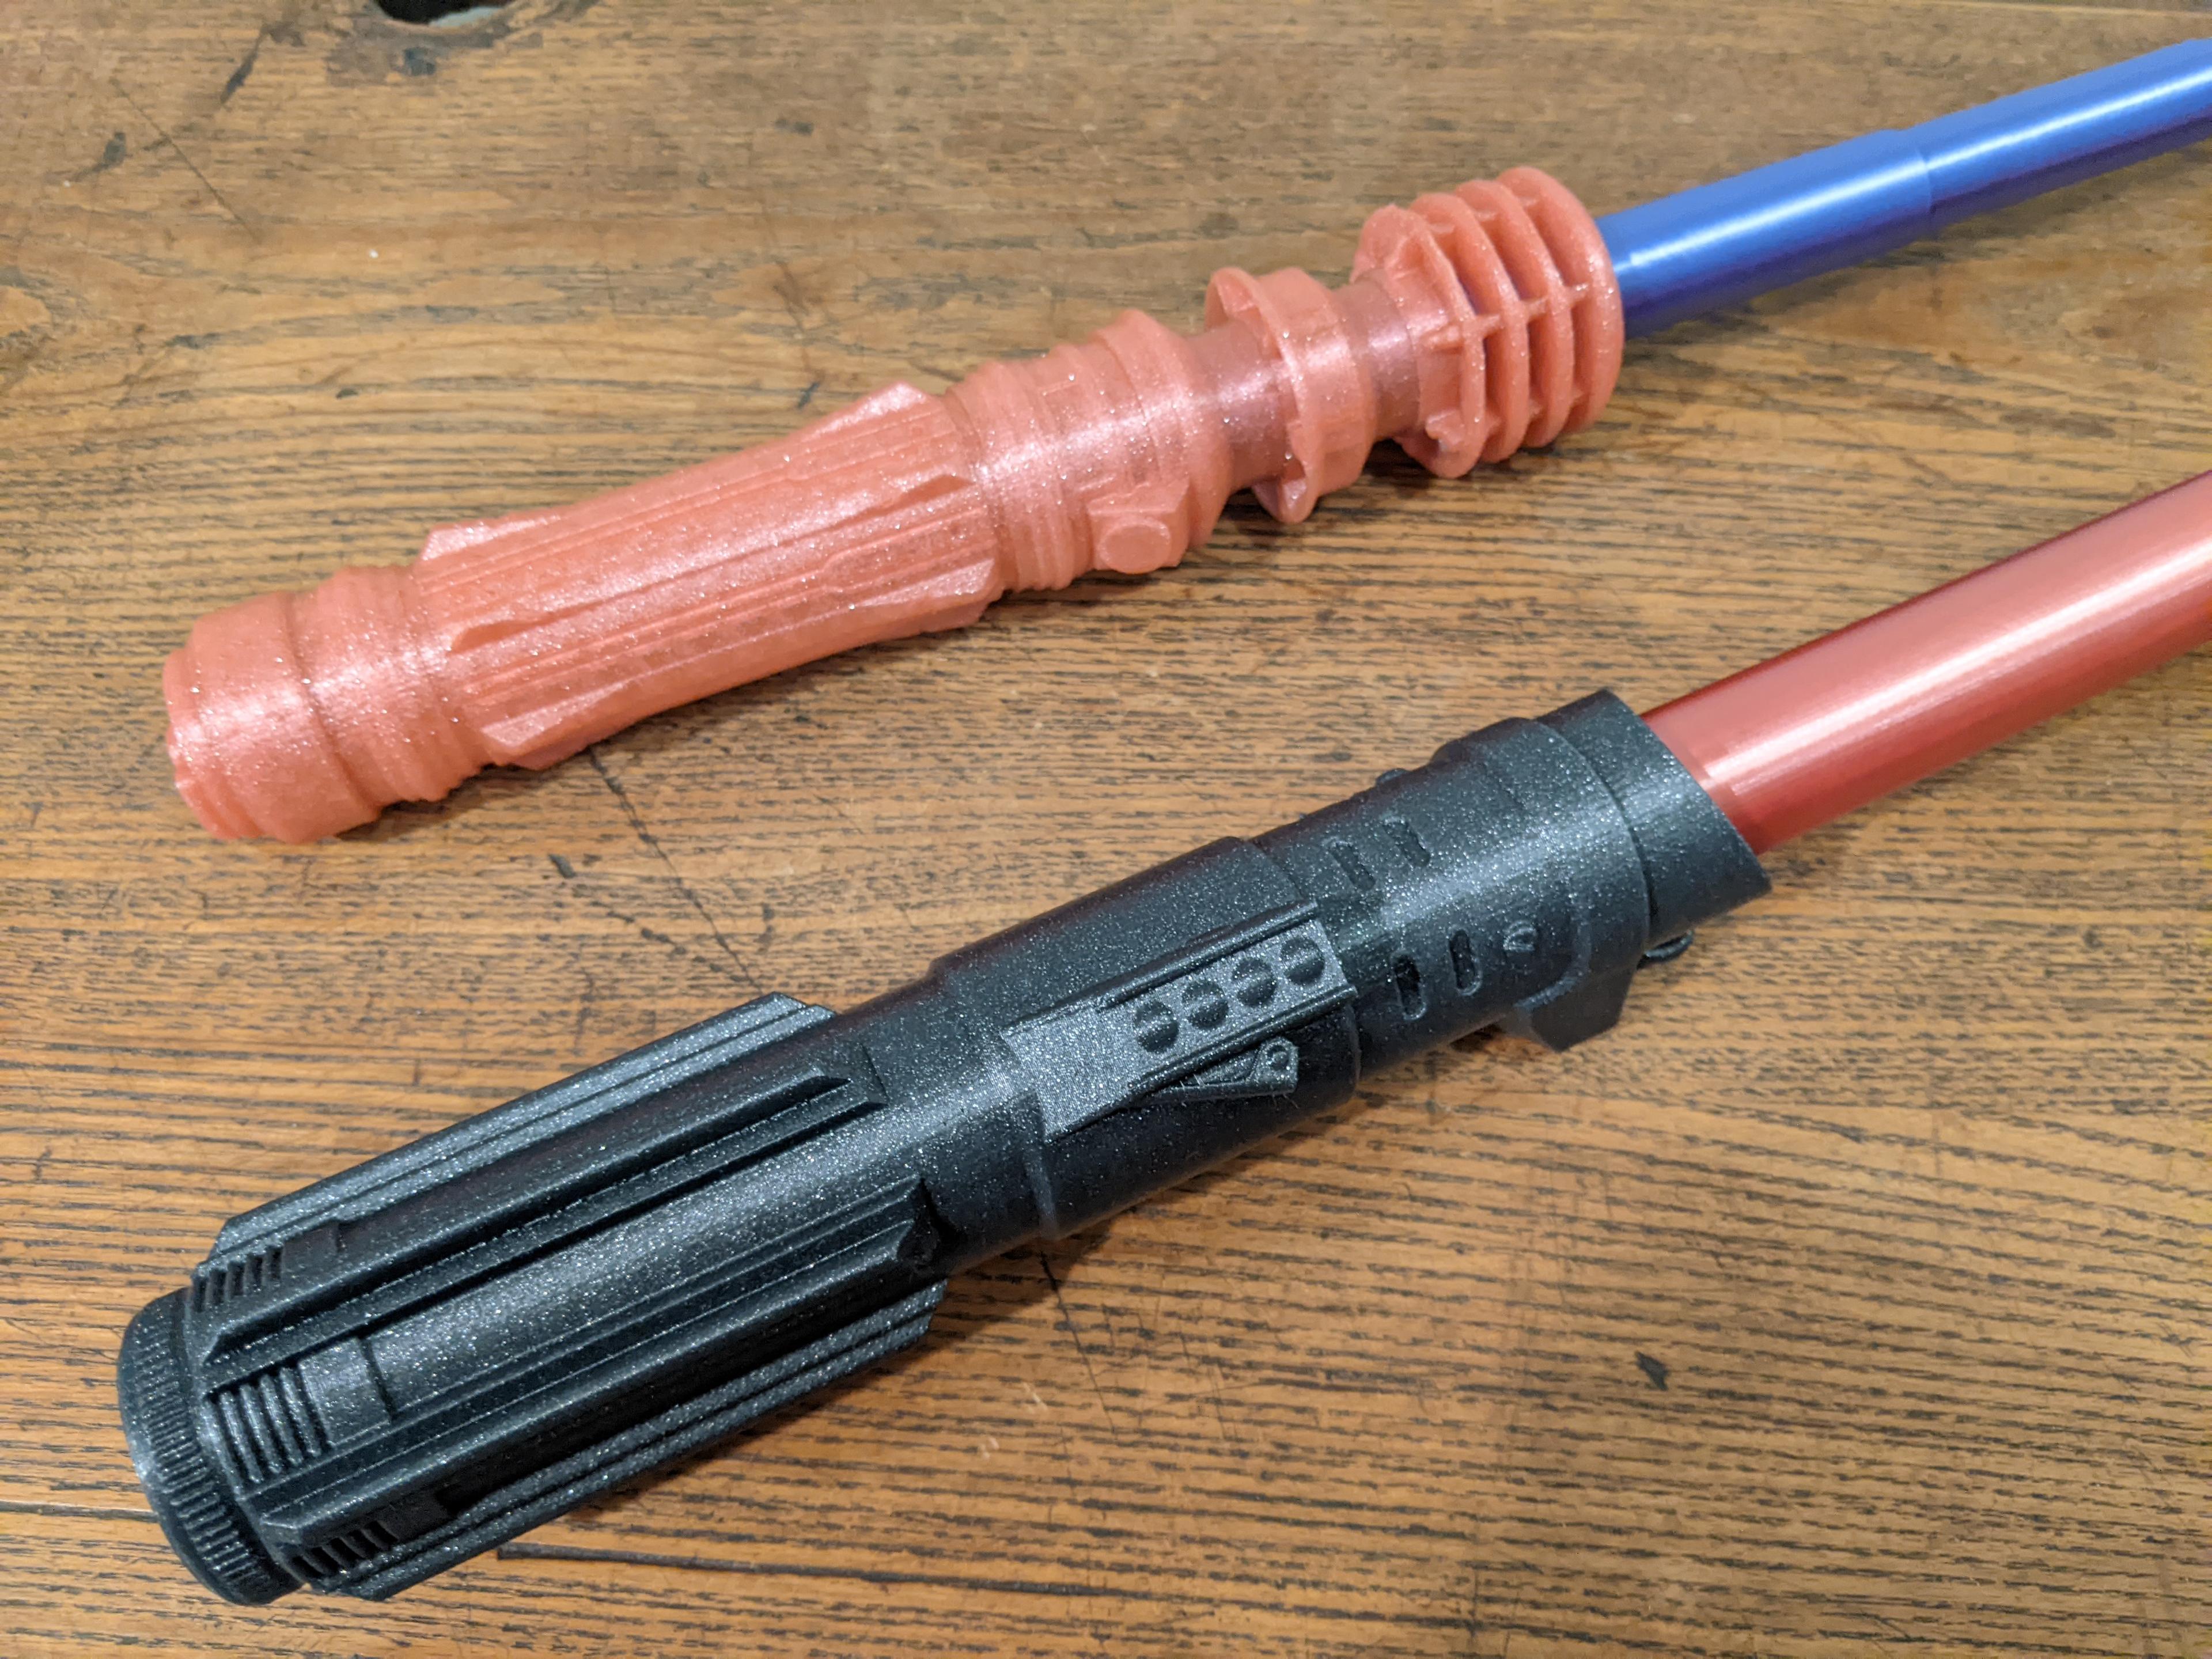 Leia's Dual Extrusion Collapsing Lightsaber  3d model